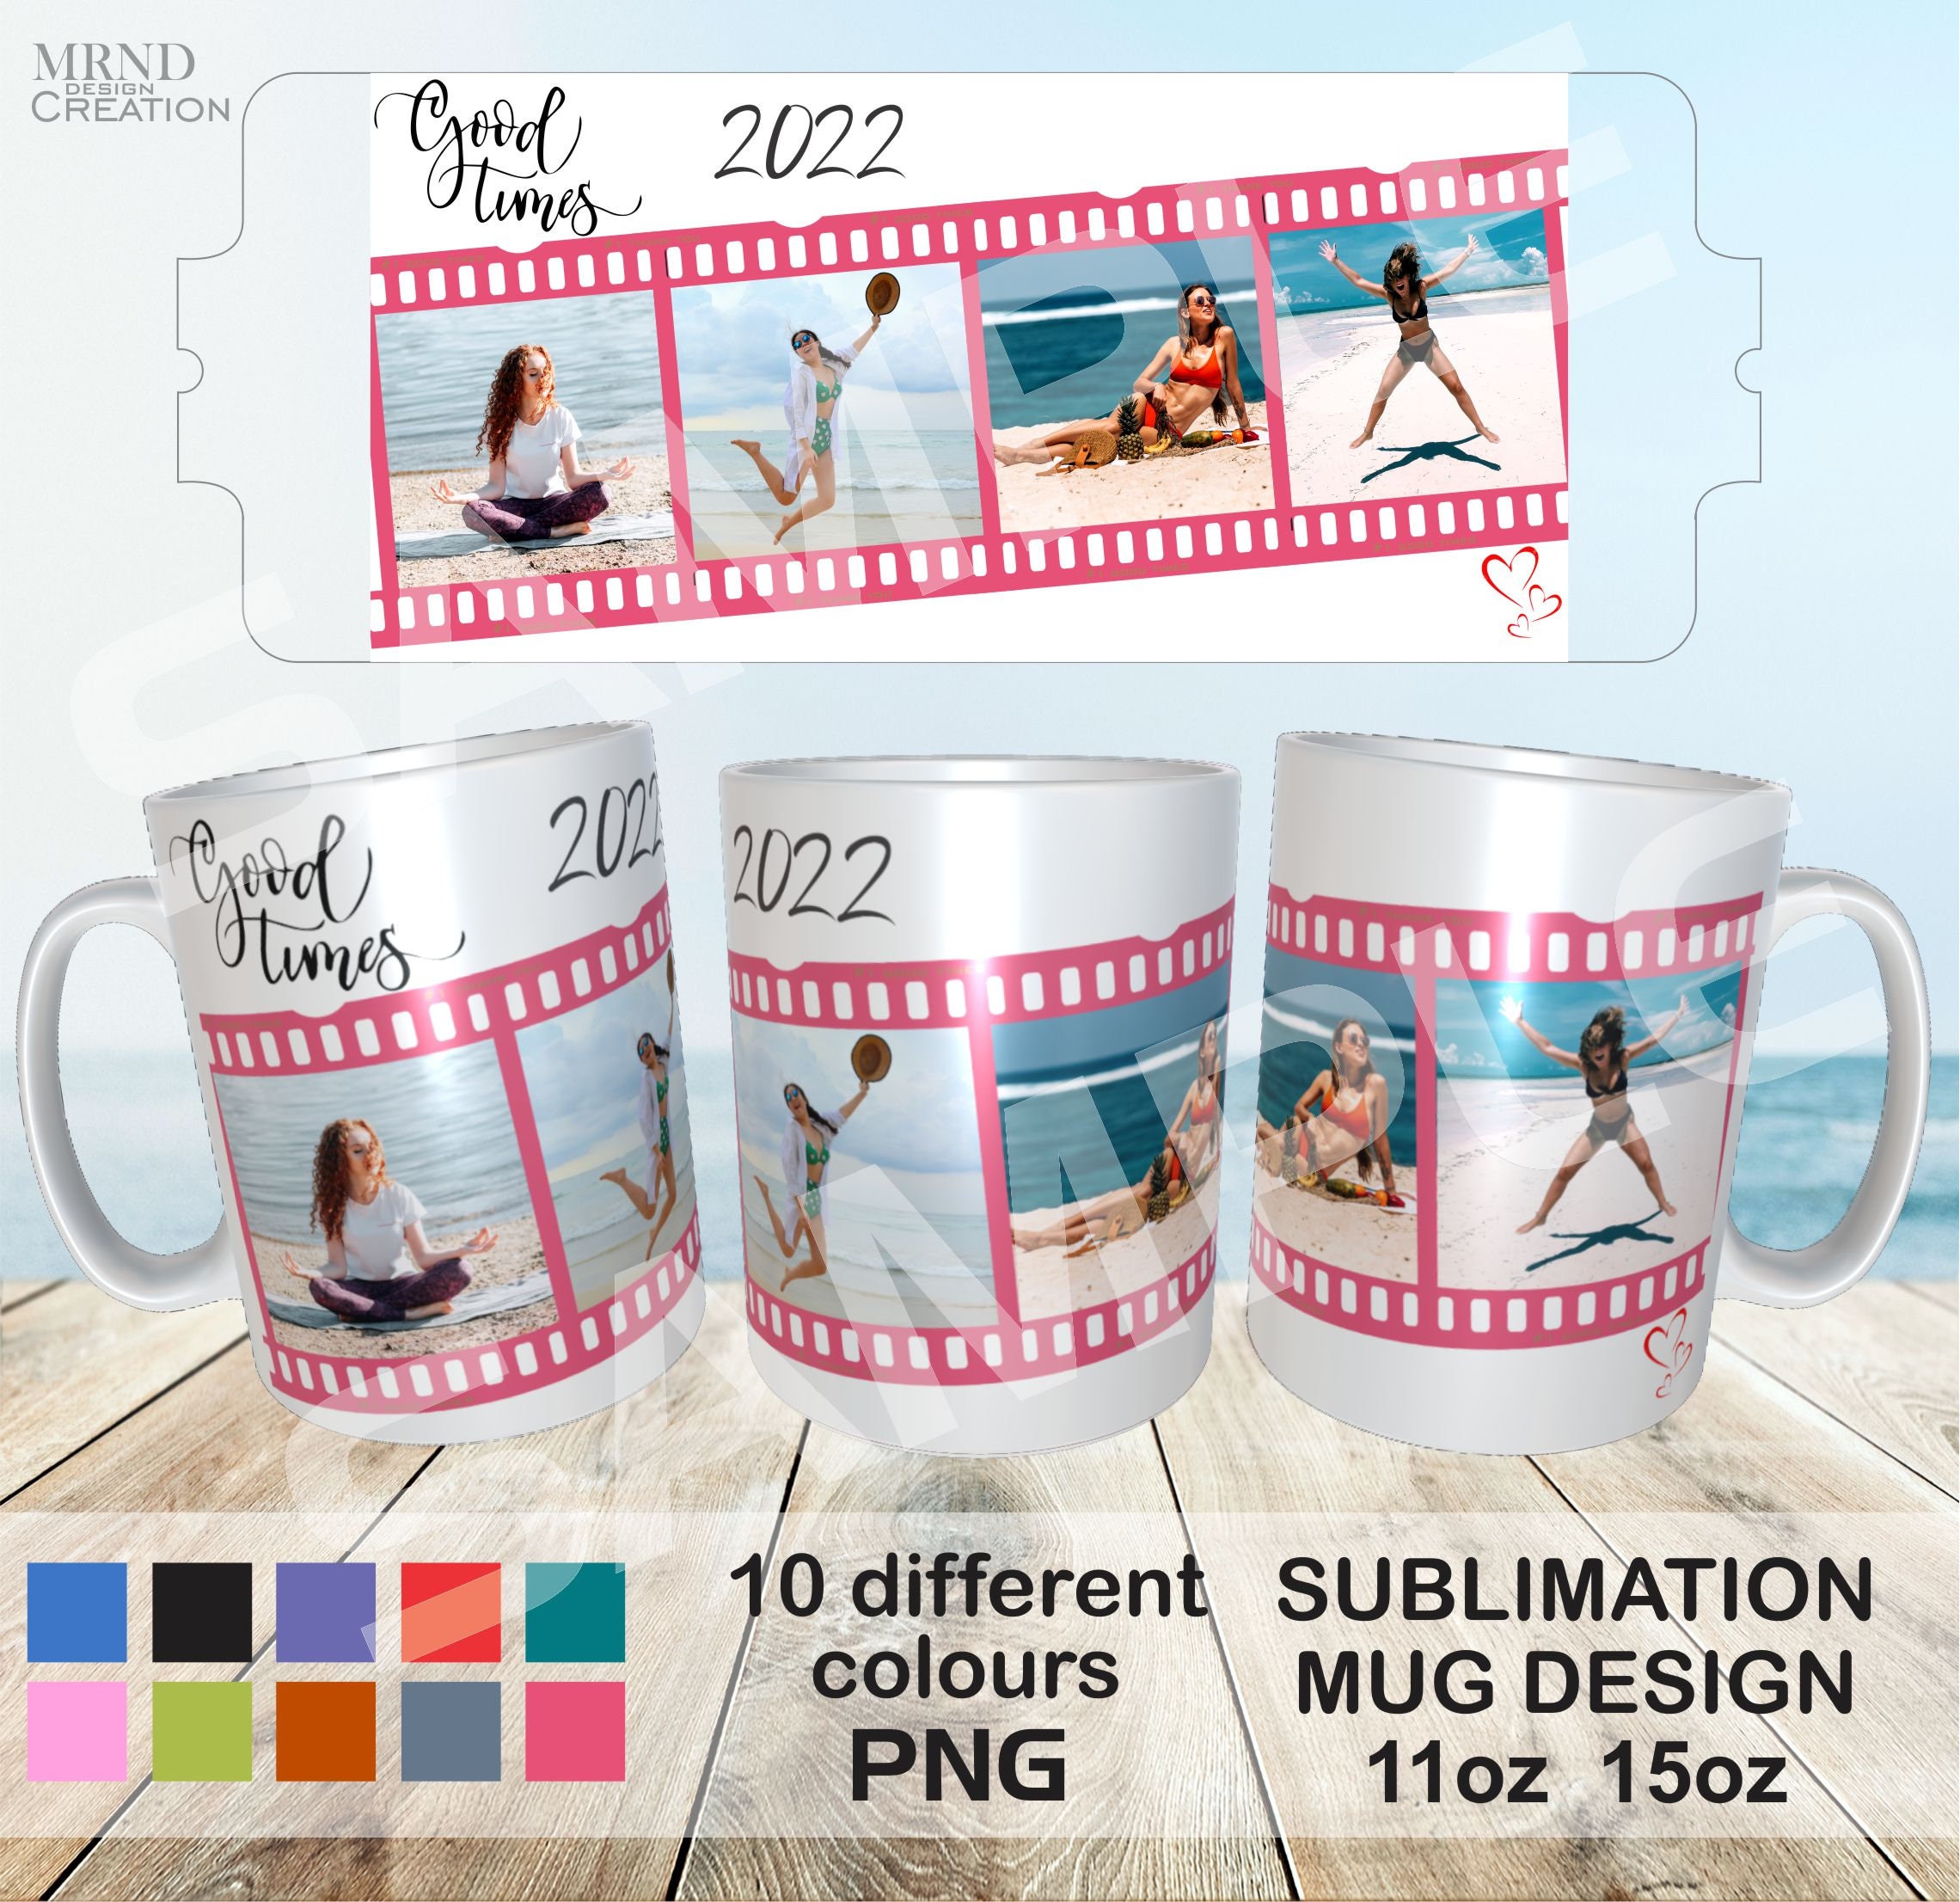 8X12 Inch Sublimation Shrink Wrap Sleeves, 60 Pcs White Sublimation Shrink  Wrap for Tumblers, Mugs, Cups and More 